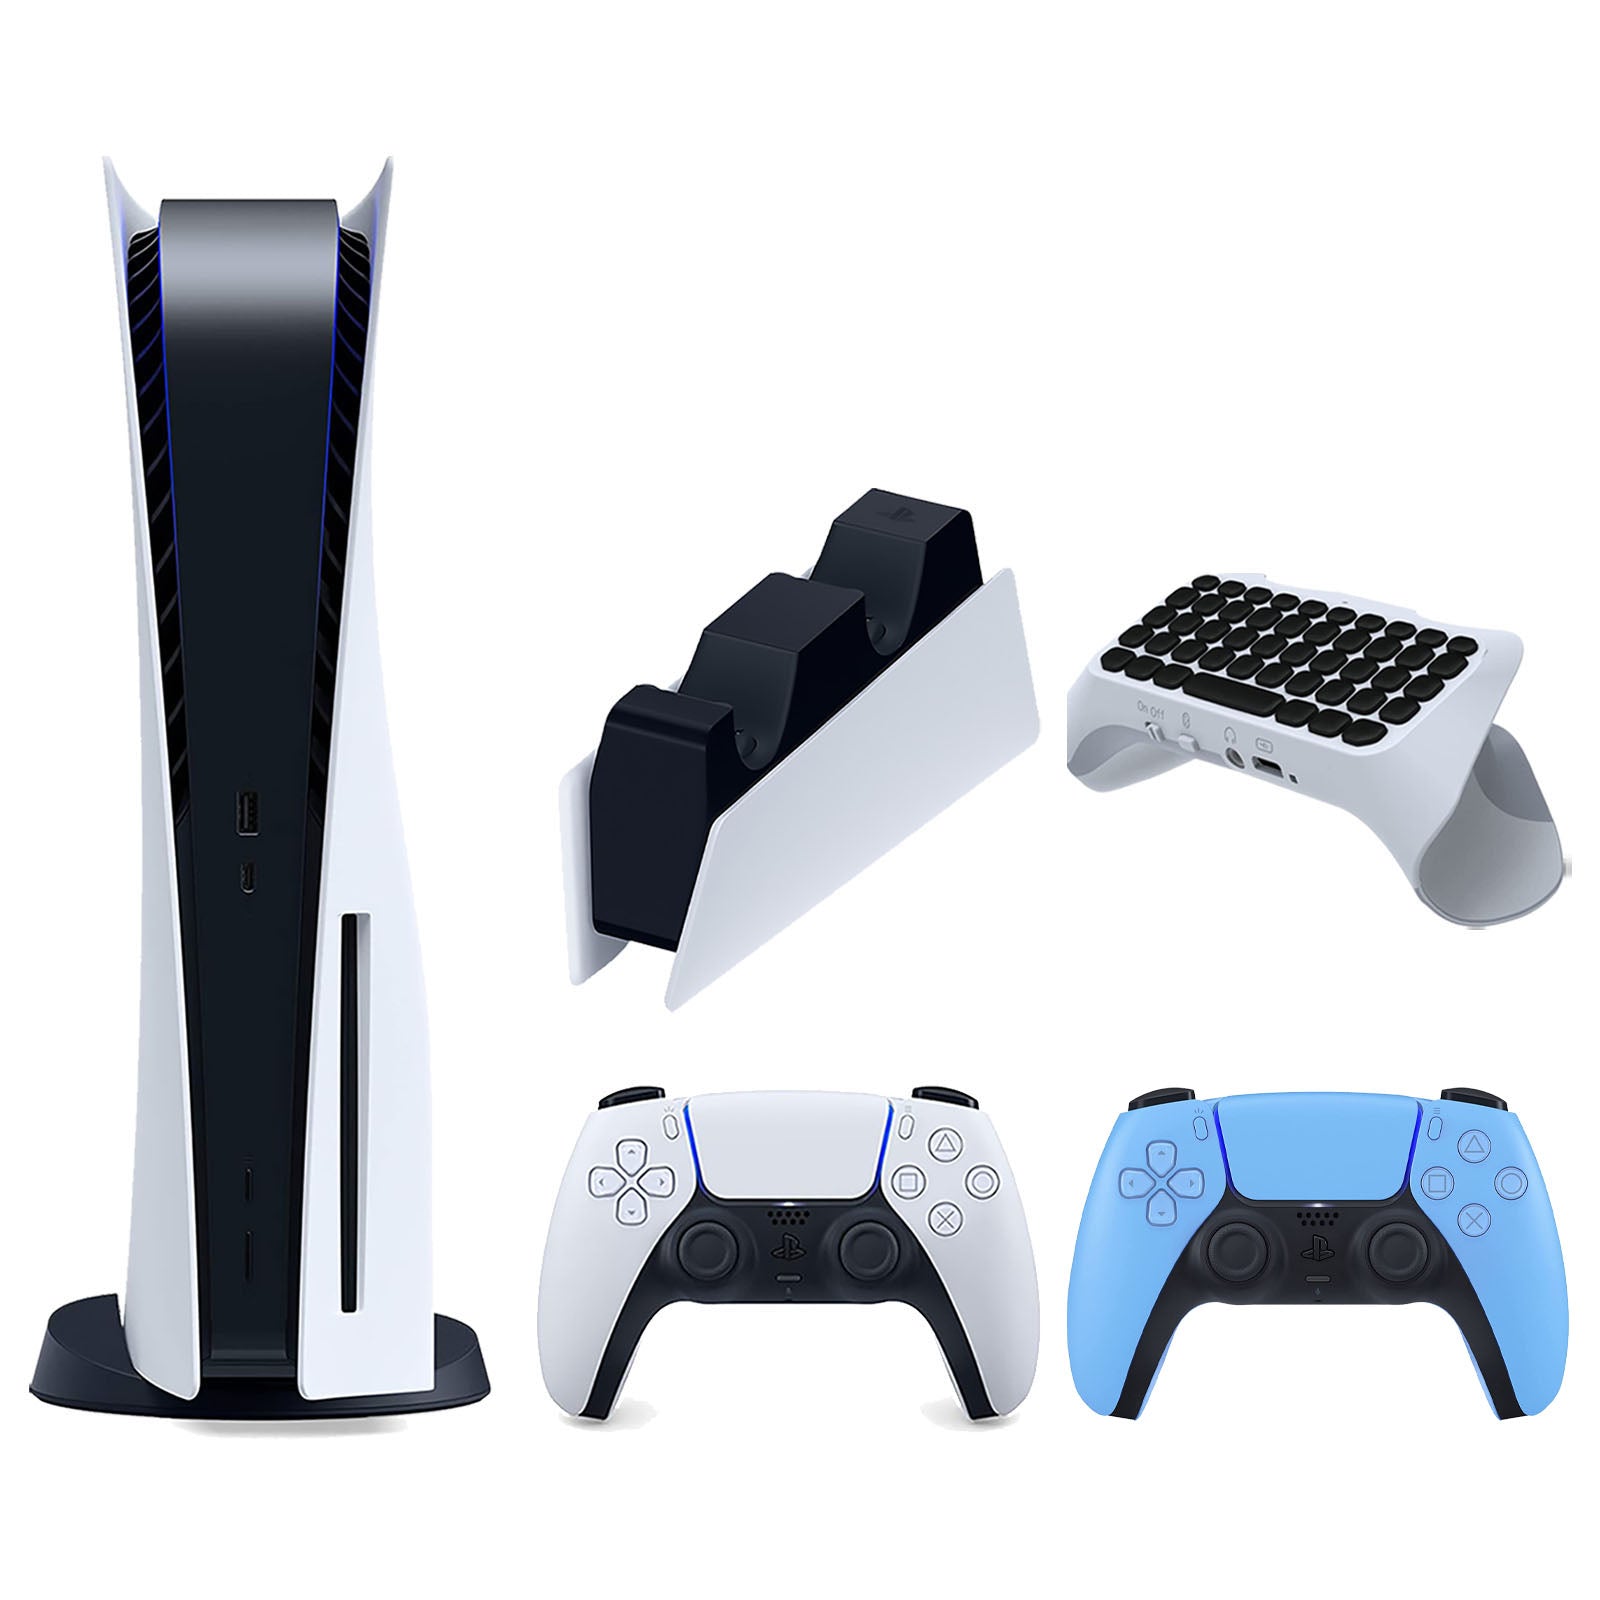 Sony Playstation 5 Disc Version Console with Extra Blue Controller, DualSense Charging Station and Surge QuickType 2.0 Wireless PS5 Controller Keypad Bundle - Pro-Distributing